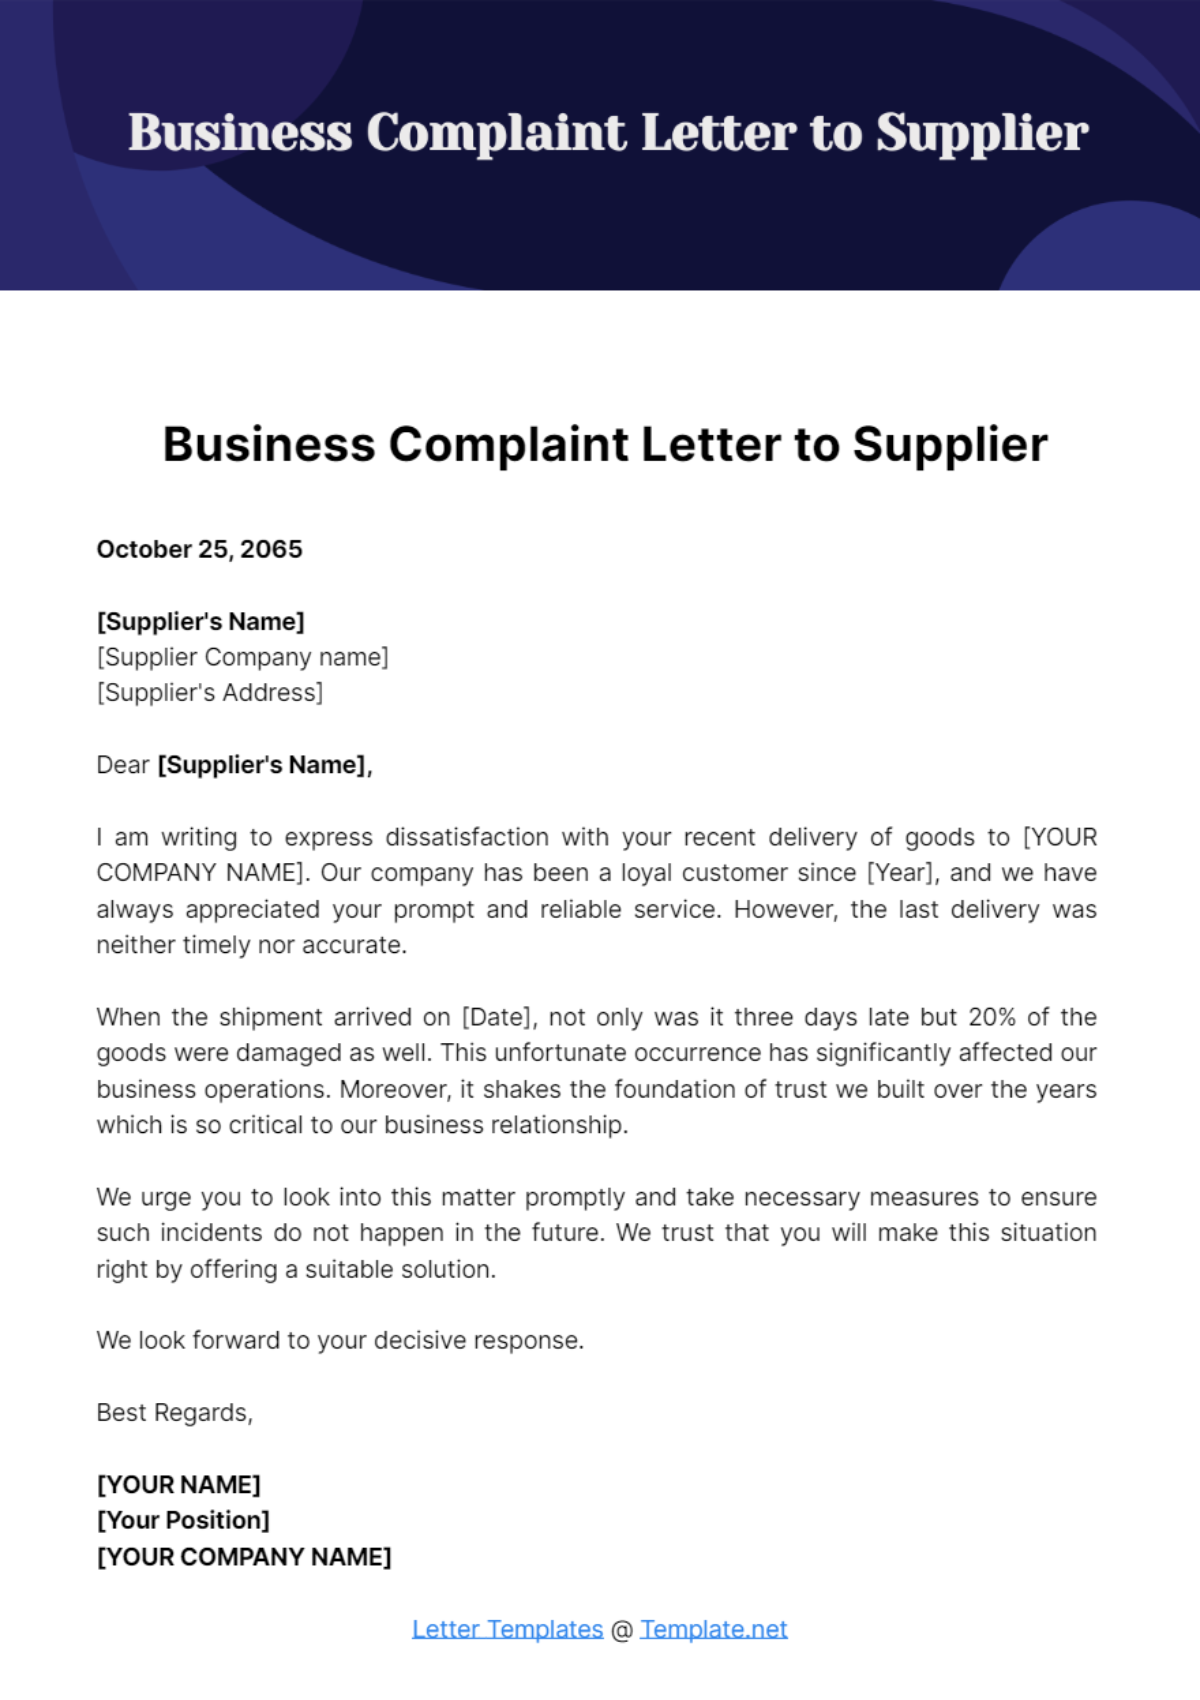 Free Business Complaint Letter to Supplier Template